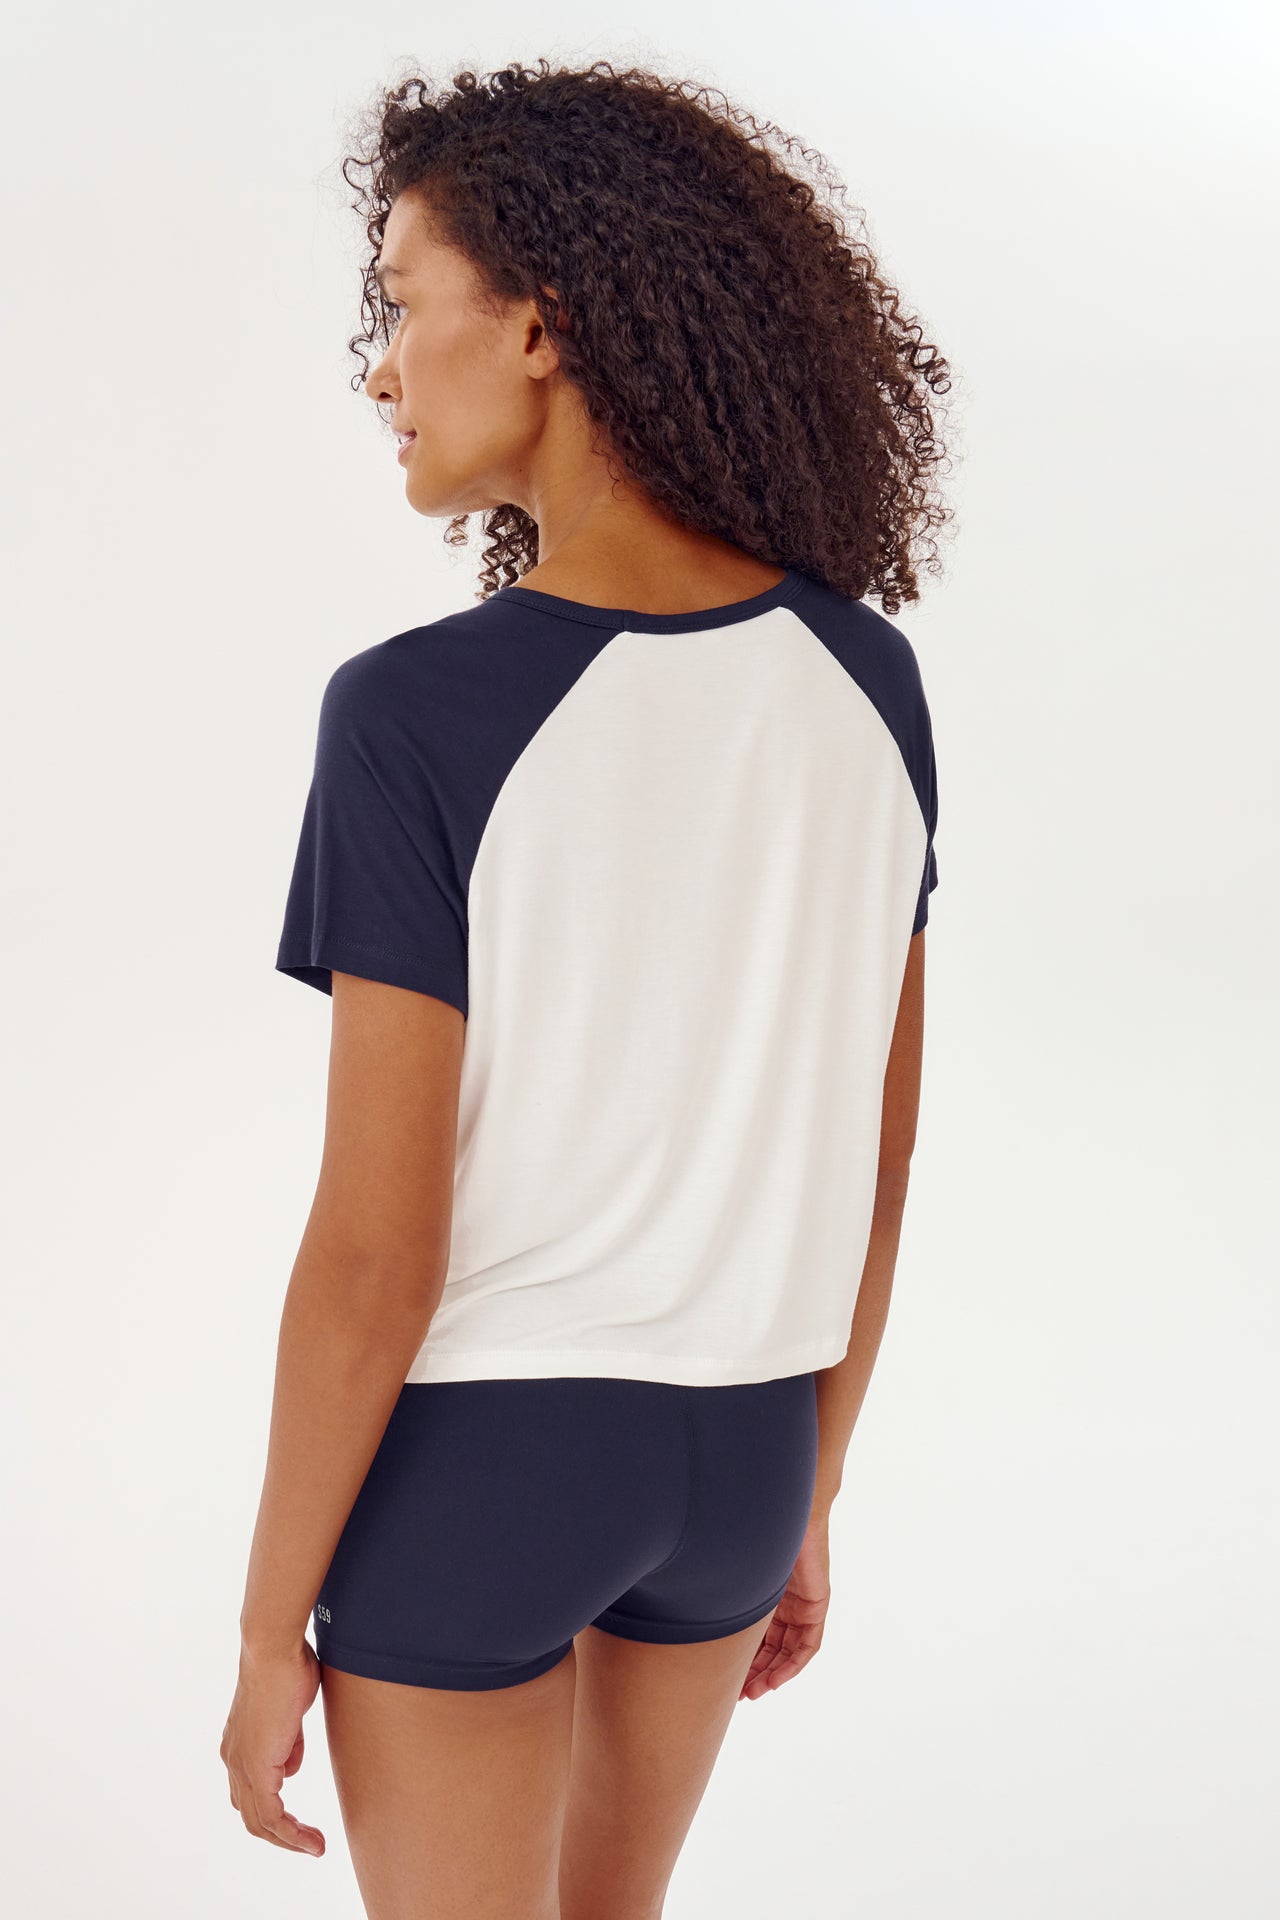 The back view of a woman wearing a SPLITS59 white and indigo baseball jersey tee, ready for her CrossFit gym workouts.